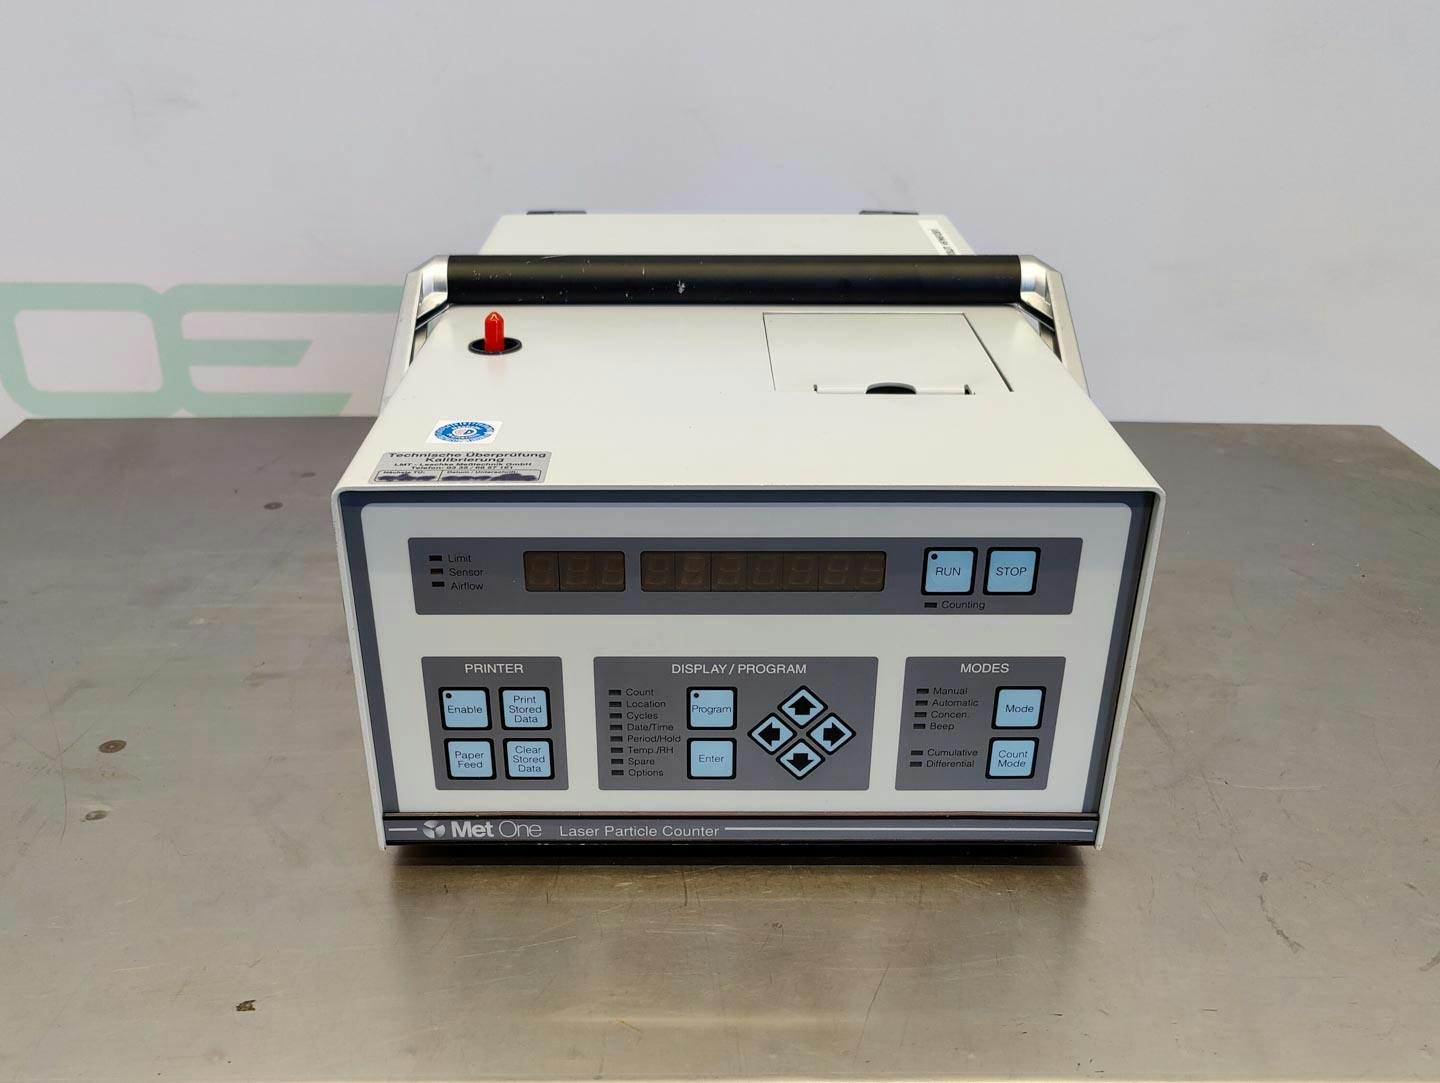 Met One A2408 "laser particle counter" - Diverso